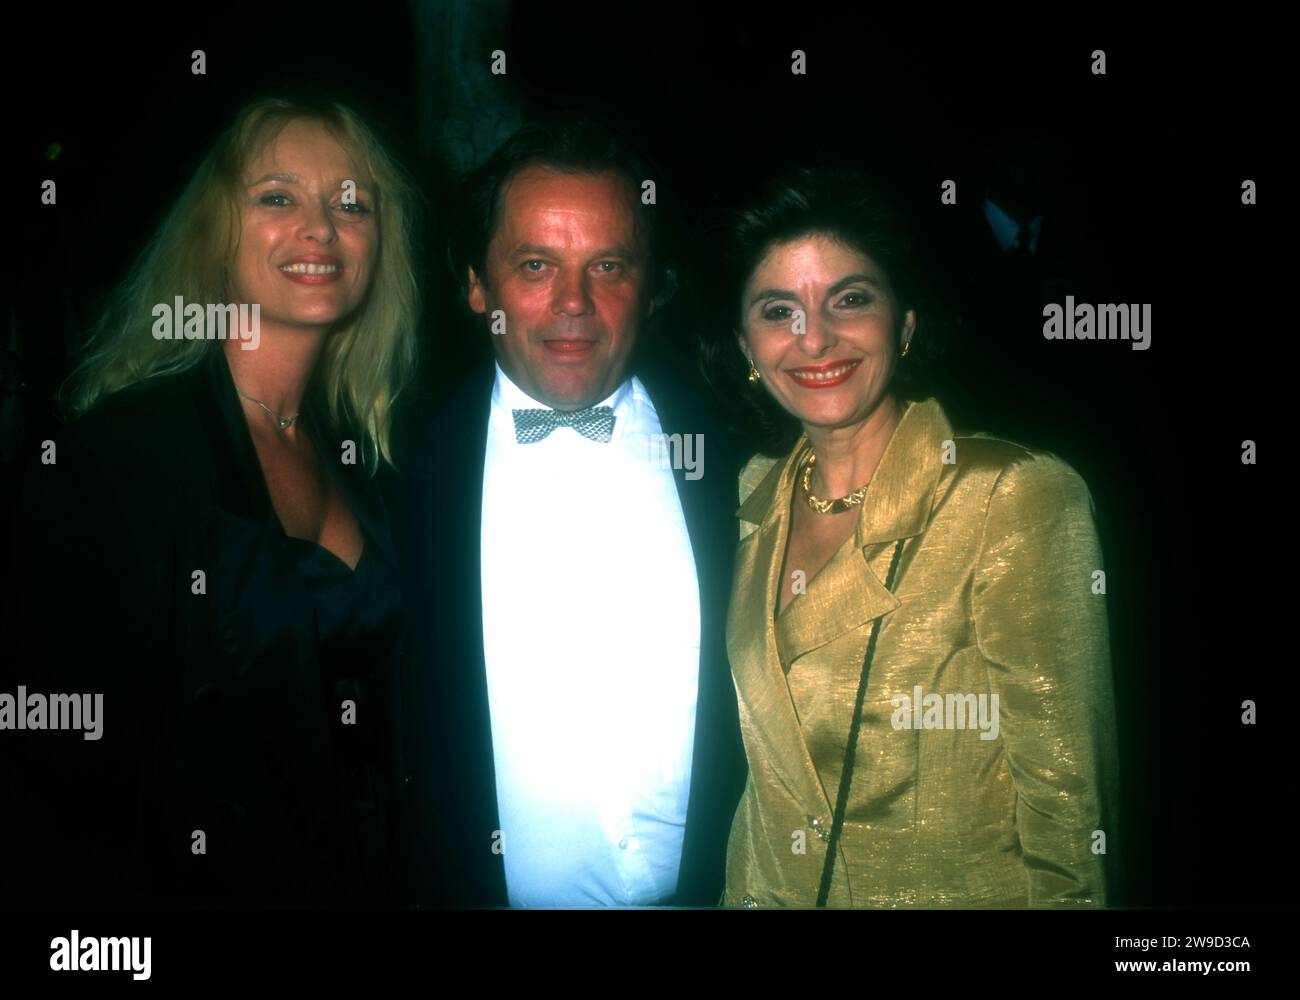 Hollywood, California, USA 5th October 1996 Actress Sybil Danning, Chef Wolfgang Puck and Attorney Gloria Allred attend Hollywood Entertainment Museum Opening on October 5, 1996 in Hollywood, California, USA. Photo by Barry King/Alamy Stock Photo Stock Photo